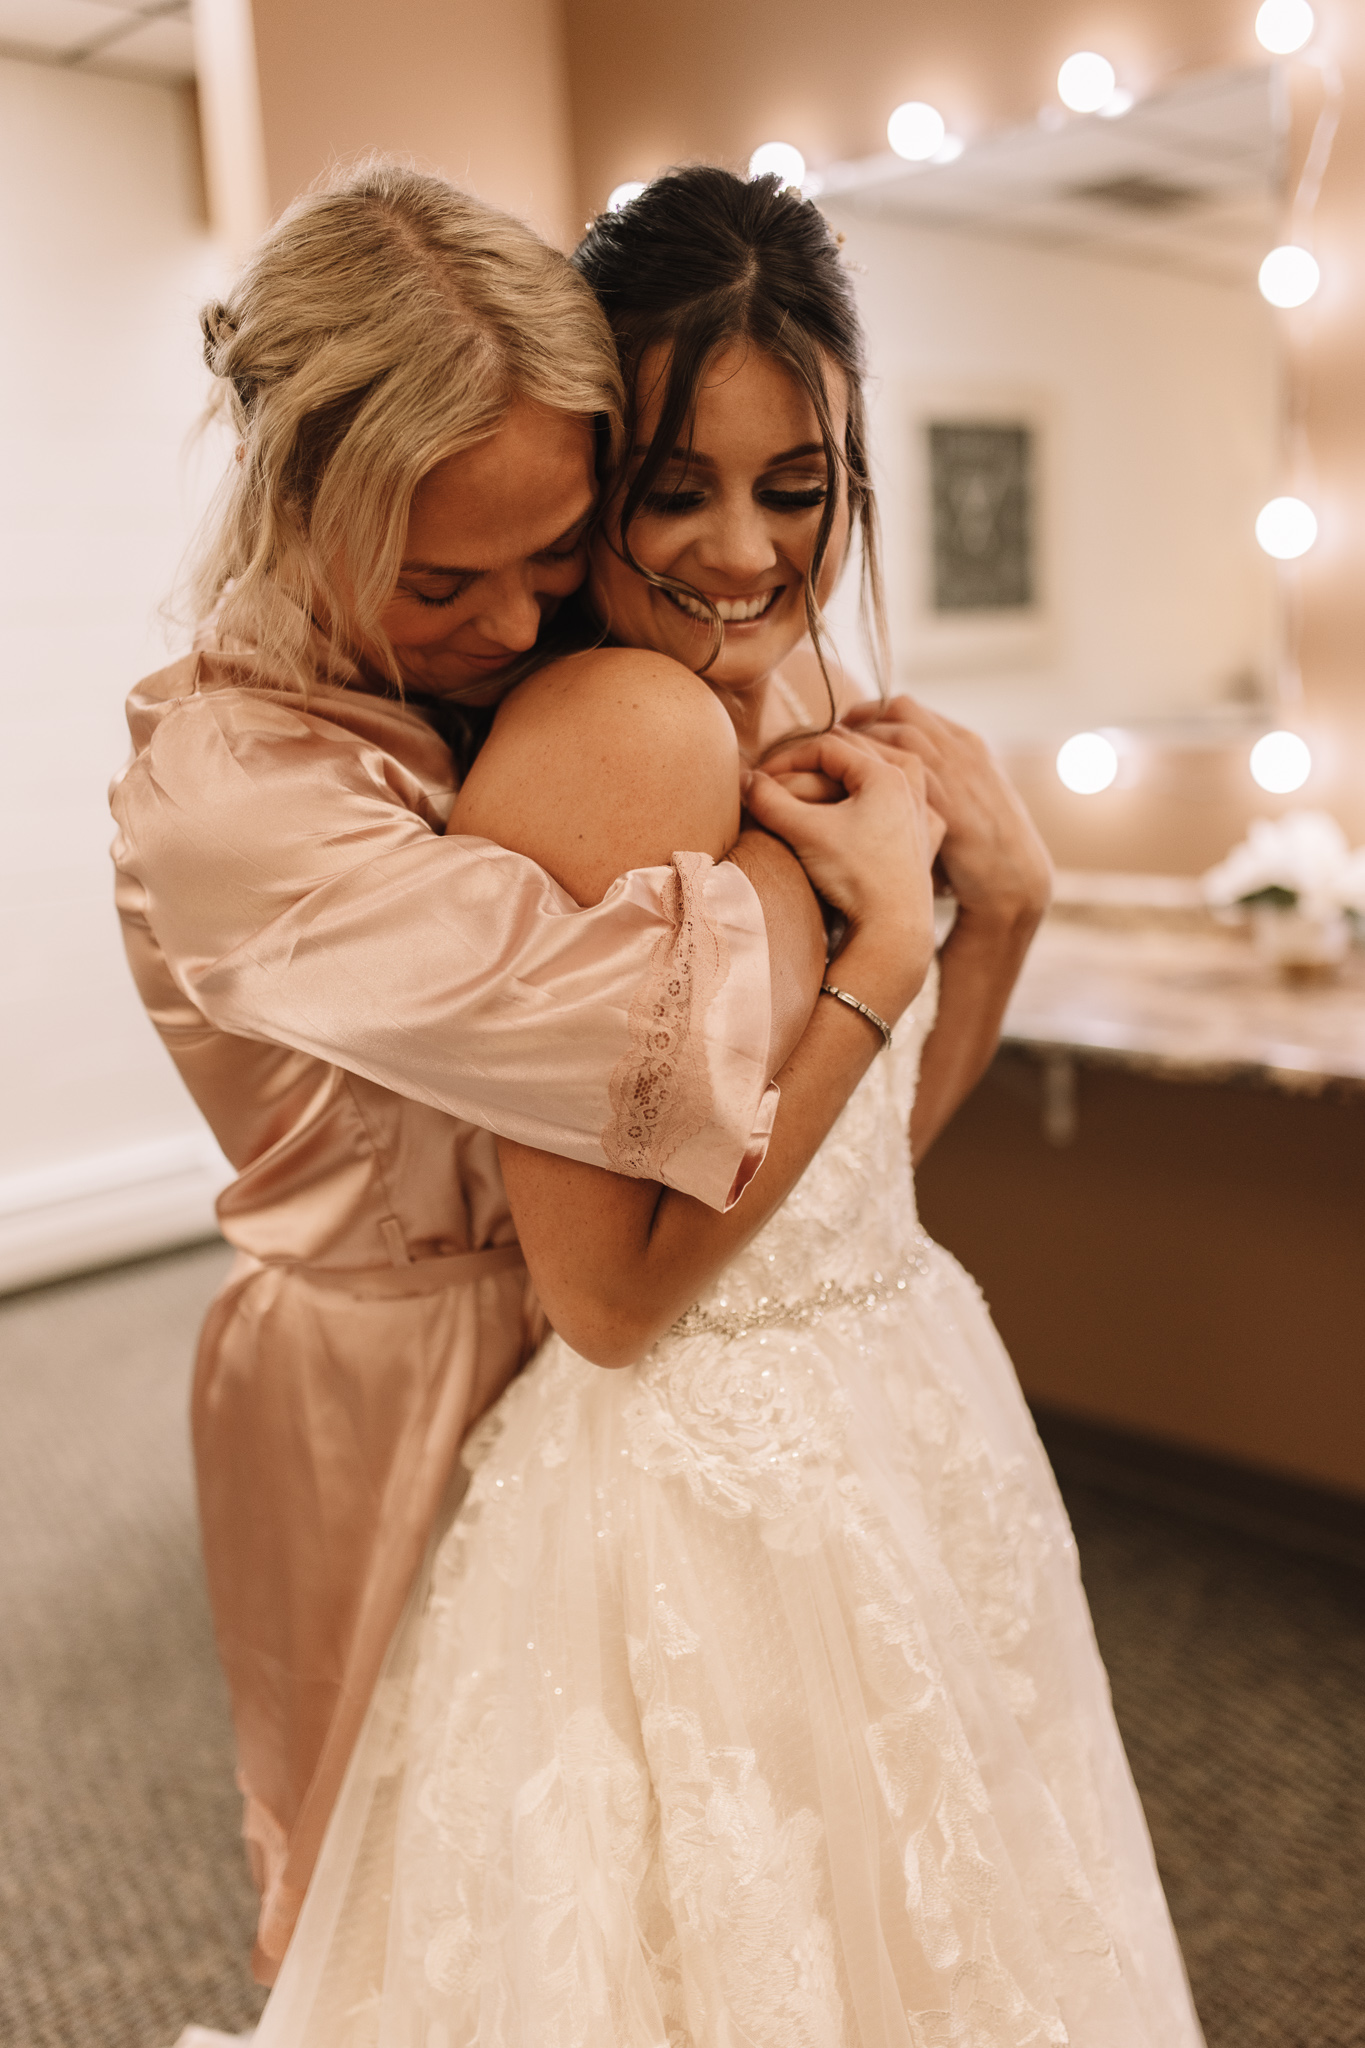 A mother hugging her daughter on her wedding day in the bridal suite